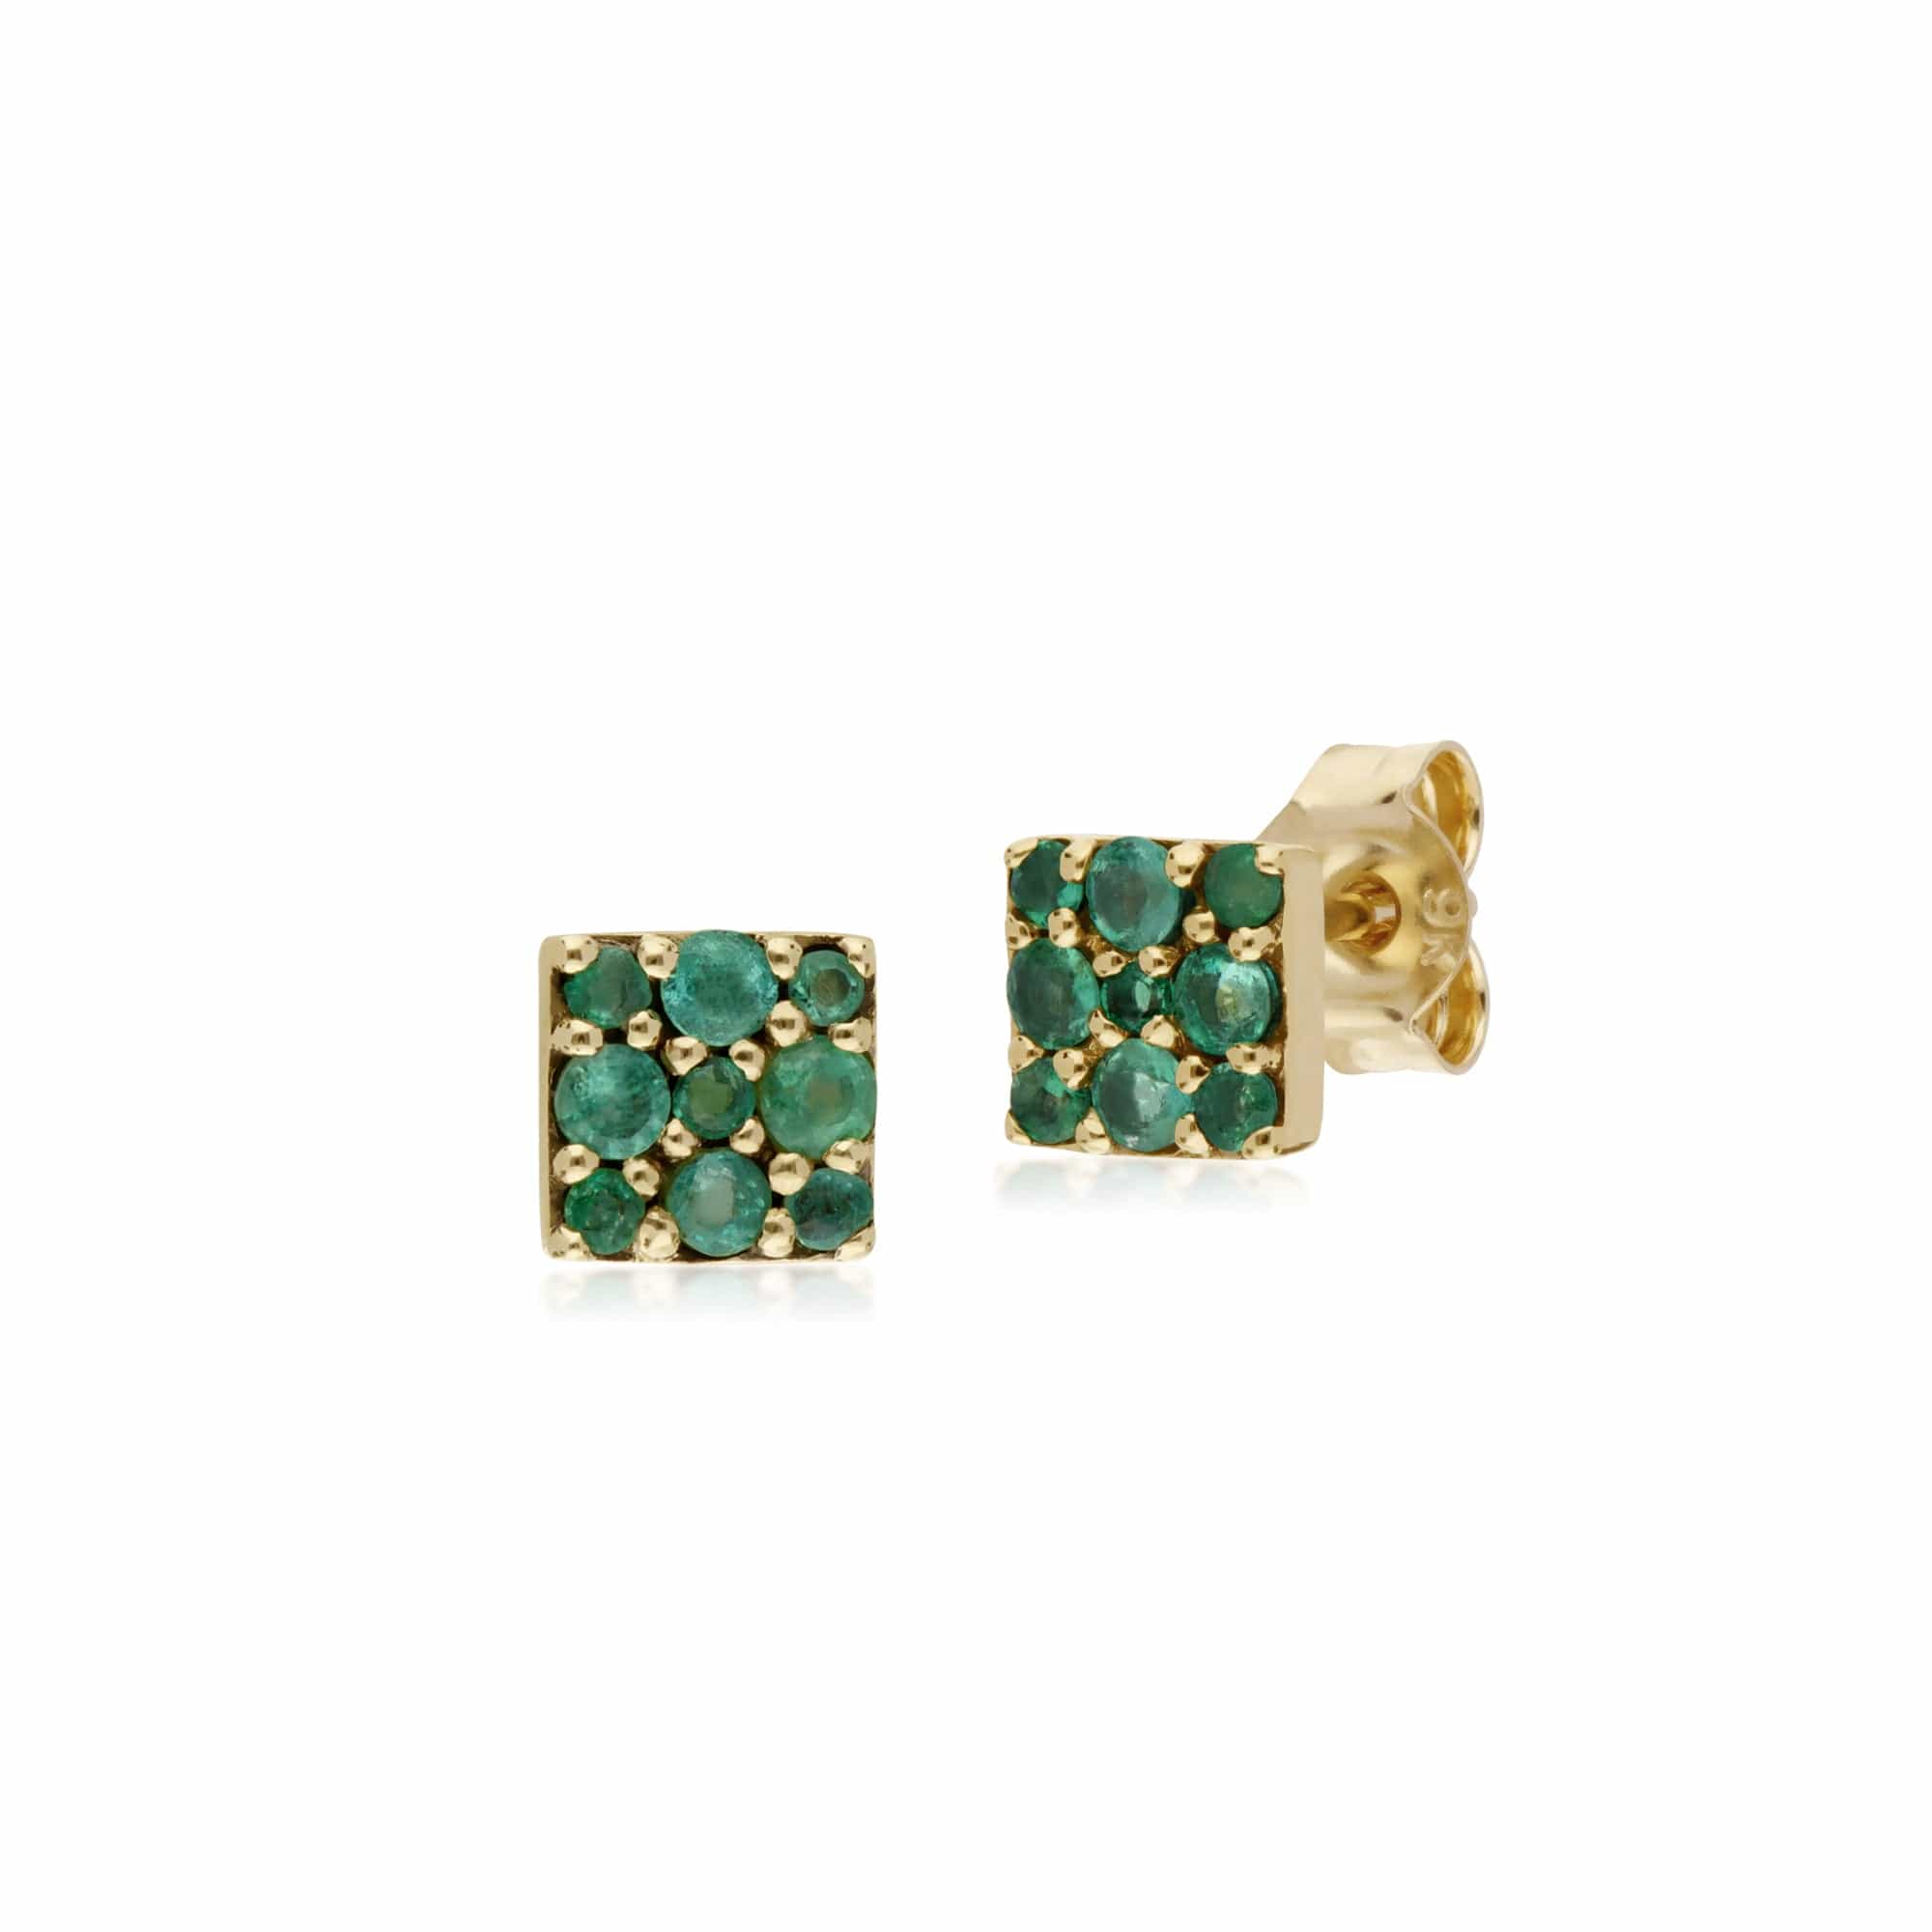 132E2573039-135P1919039 Classic Round Emerald Cluster Panel Stud Earrings & Pendant Set in 9ct Yellow Gold 2